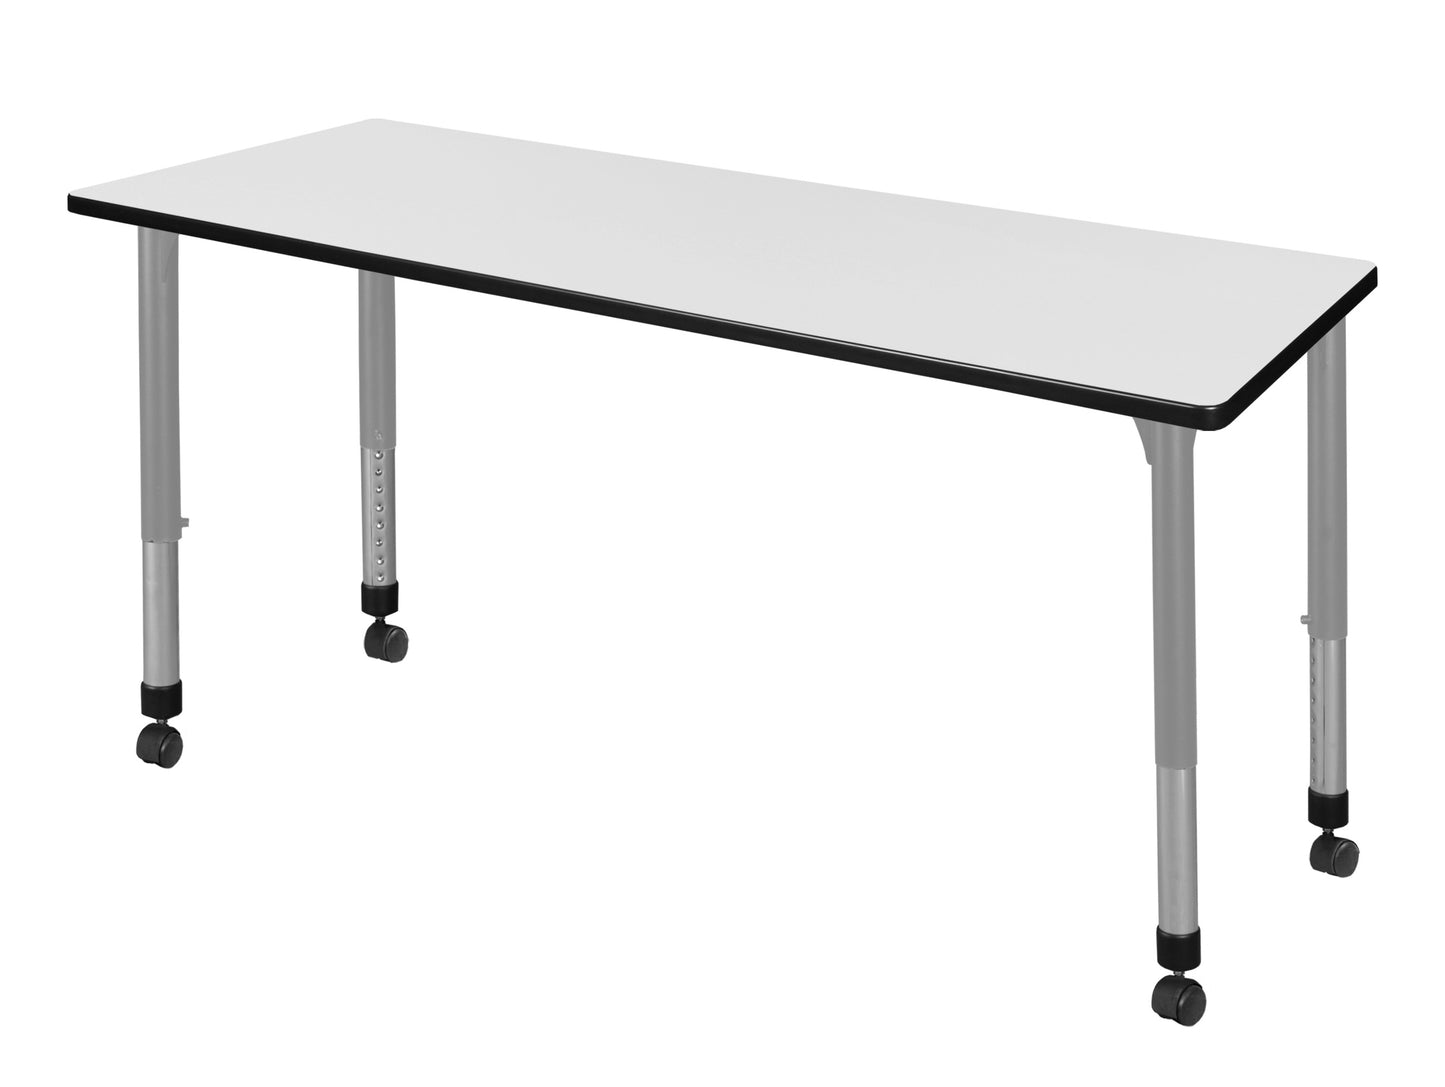 Regency Kee 60 x 30 in. Height Adjustable Mobile Classroom Activity Table